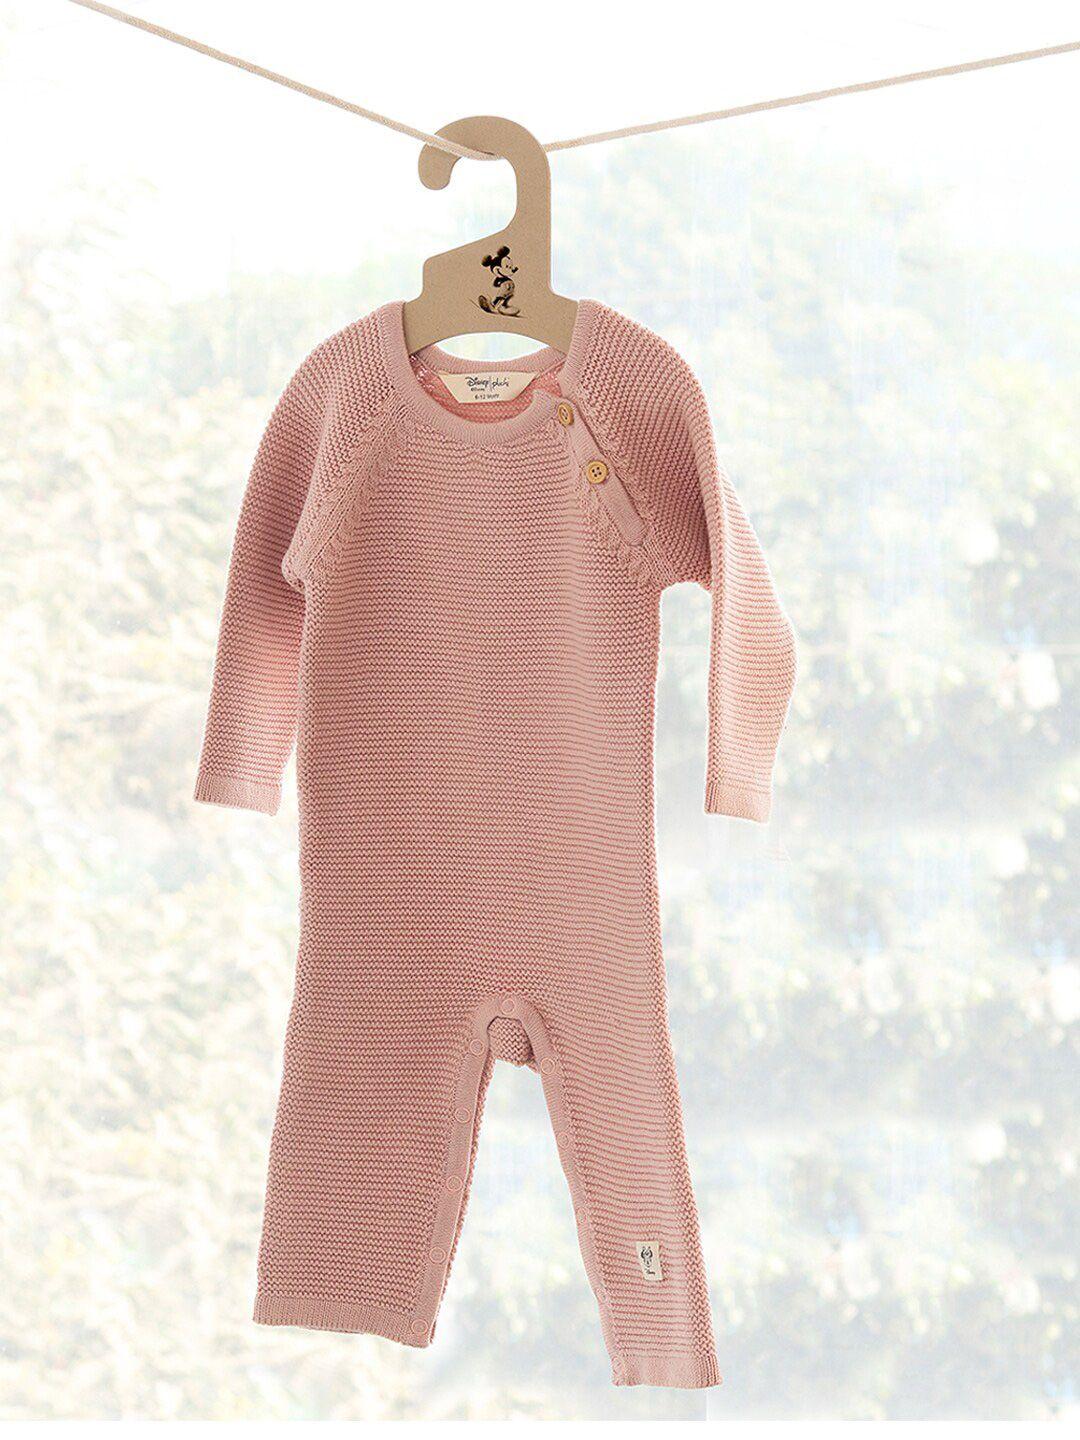 pluchi-infants-solid-knitted-romper